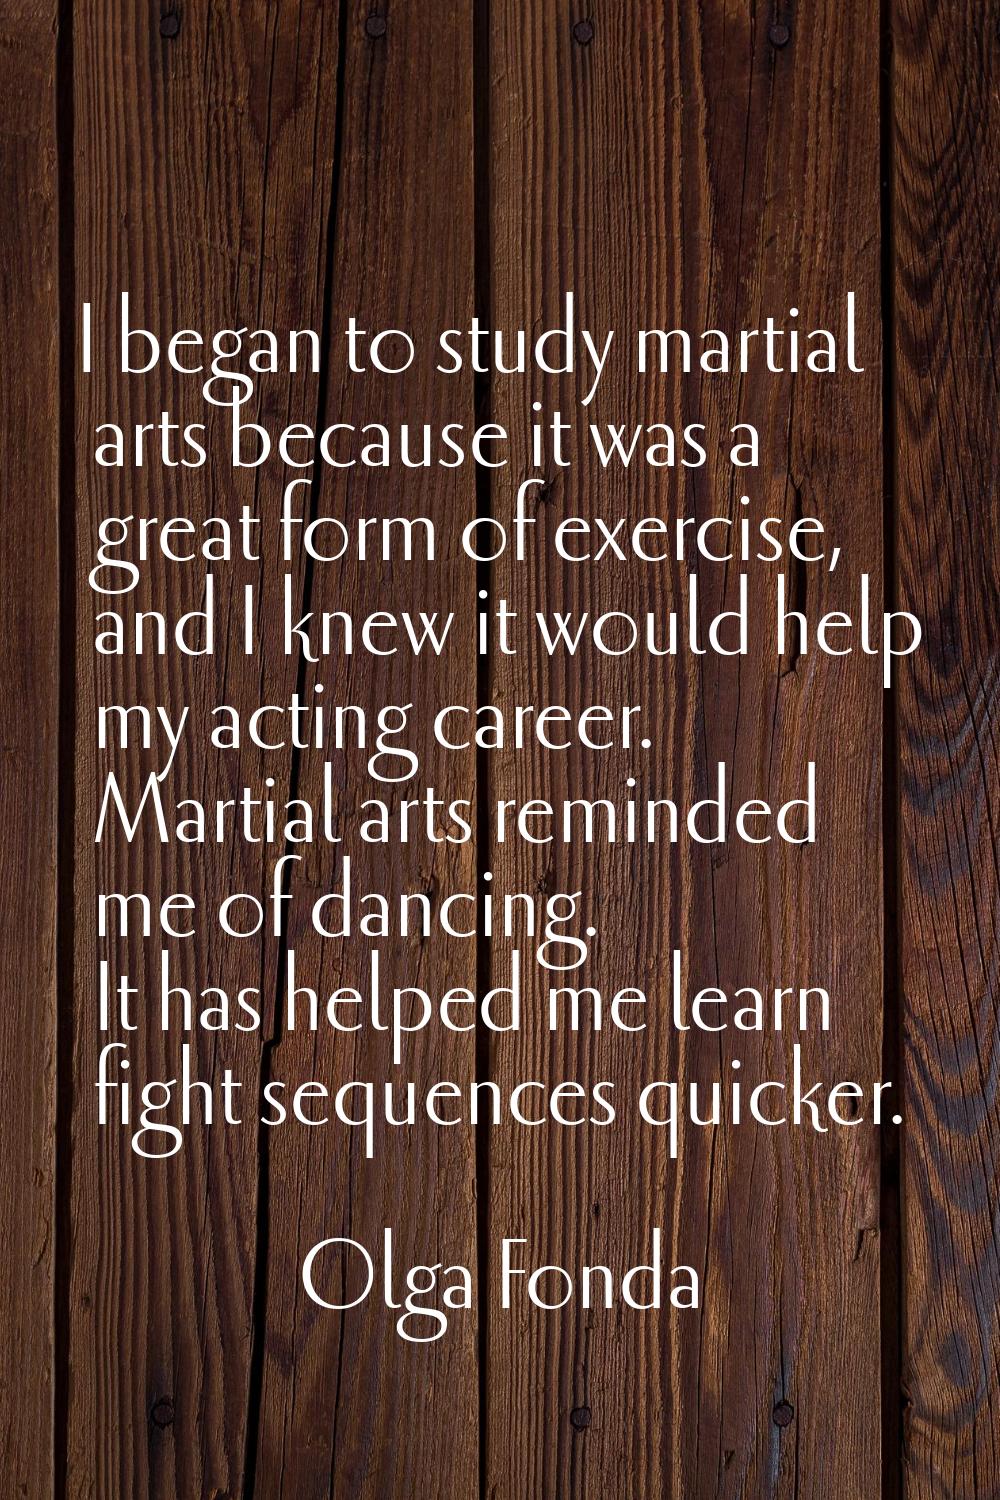 I began to study martial arts because it was a great form of exercise, and I knew it would help my 